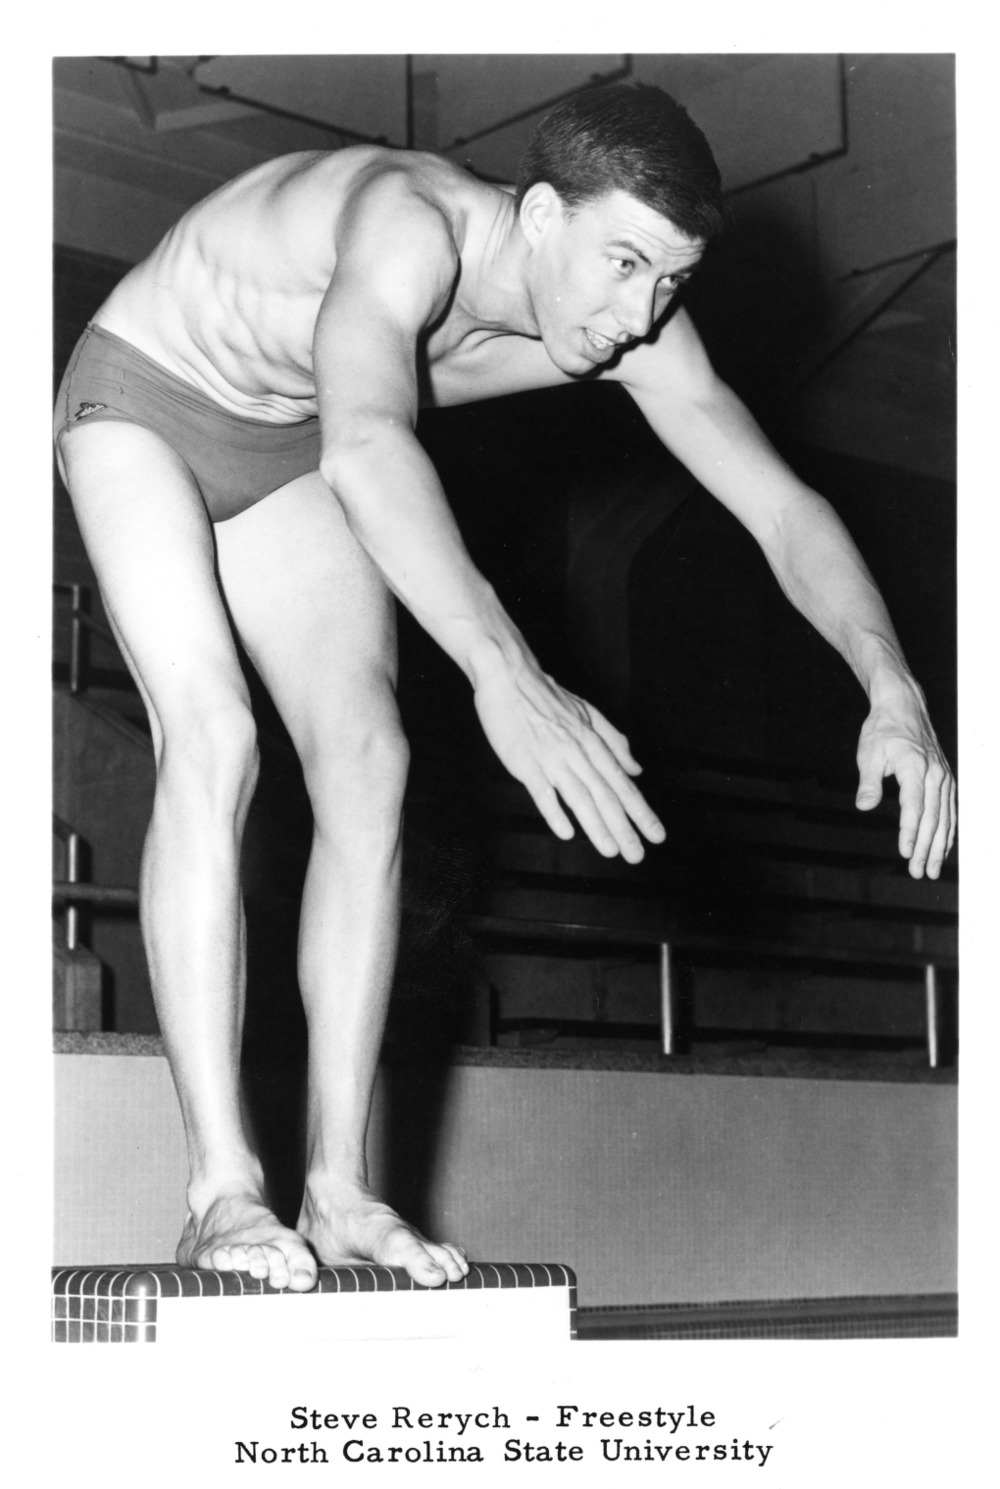 Black and white photo of NC State swimmer Steve Rerych as he is about to dive into the pool.